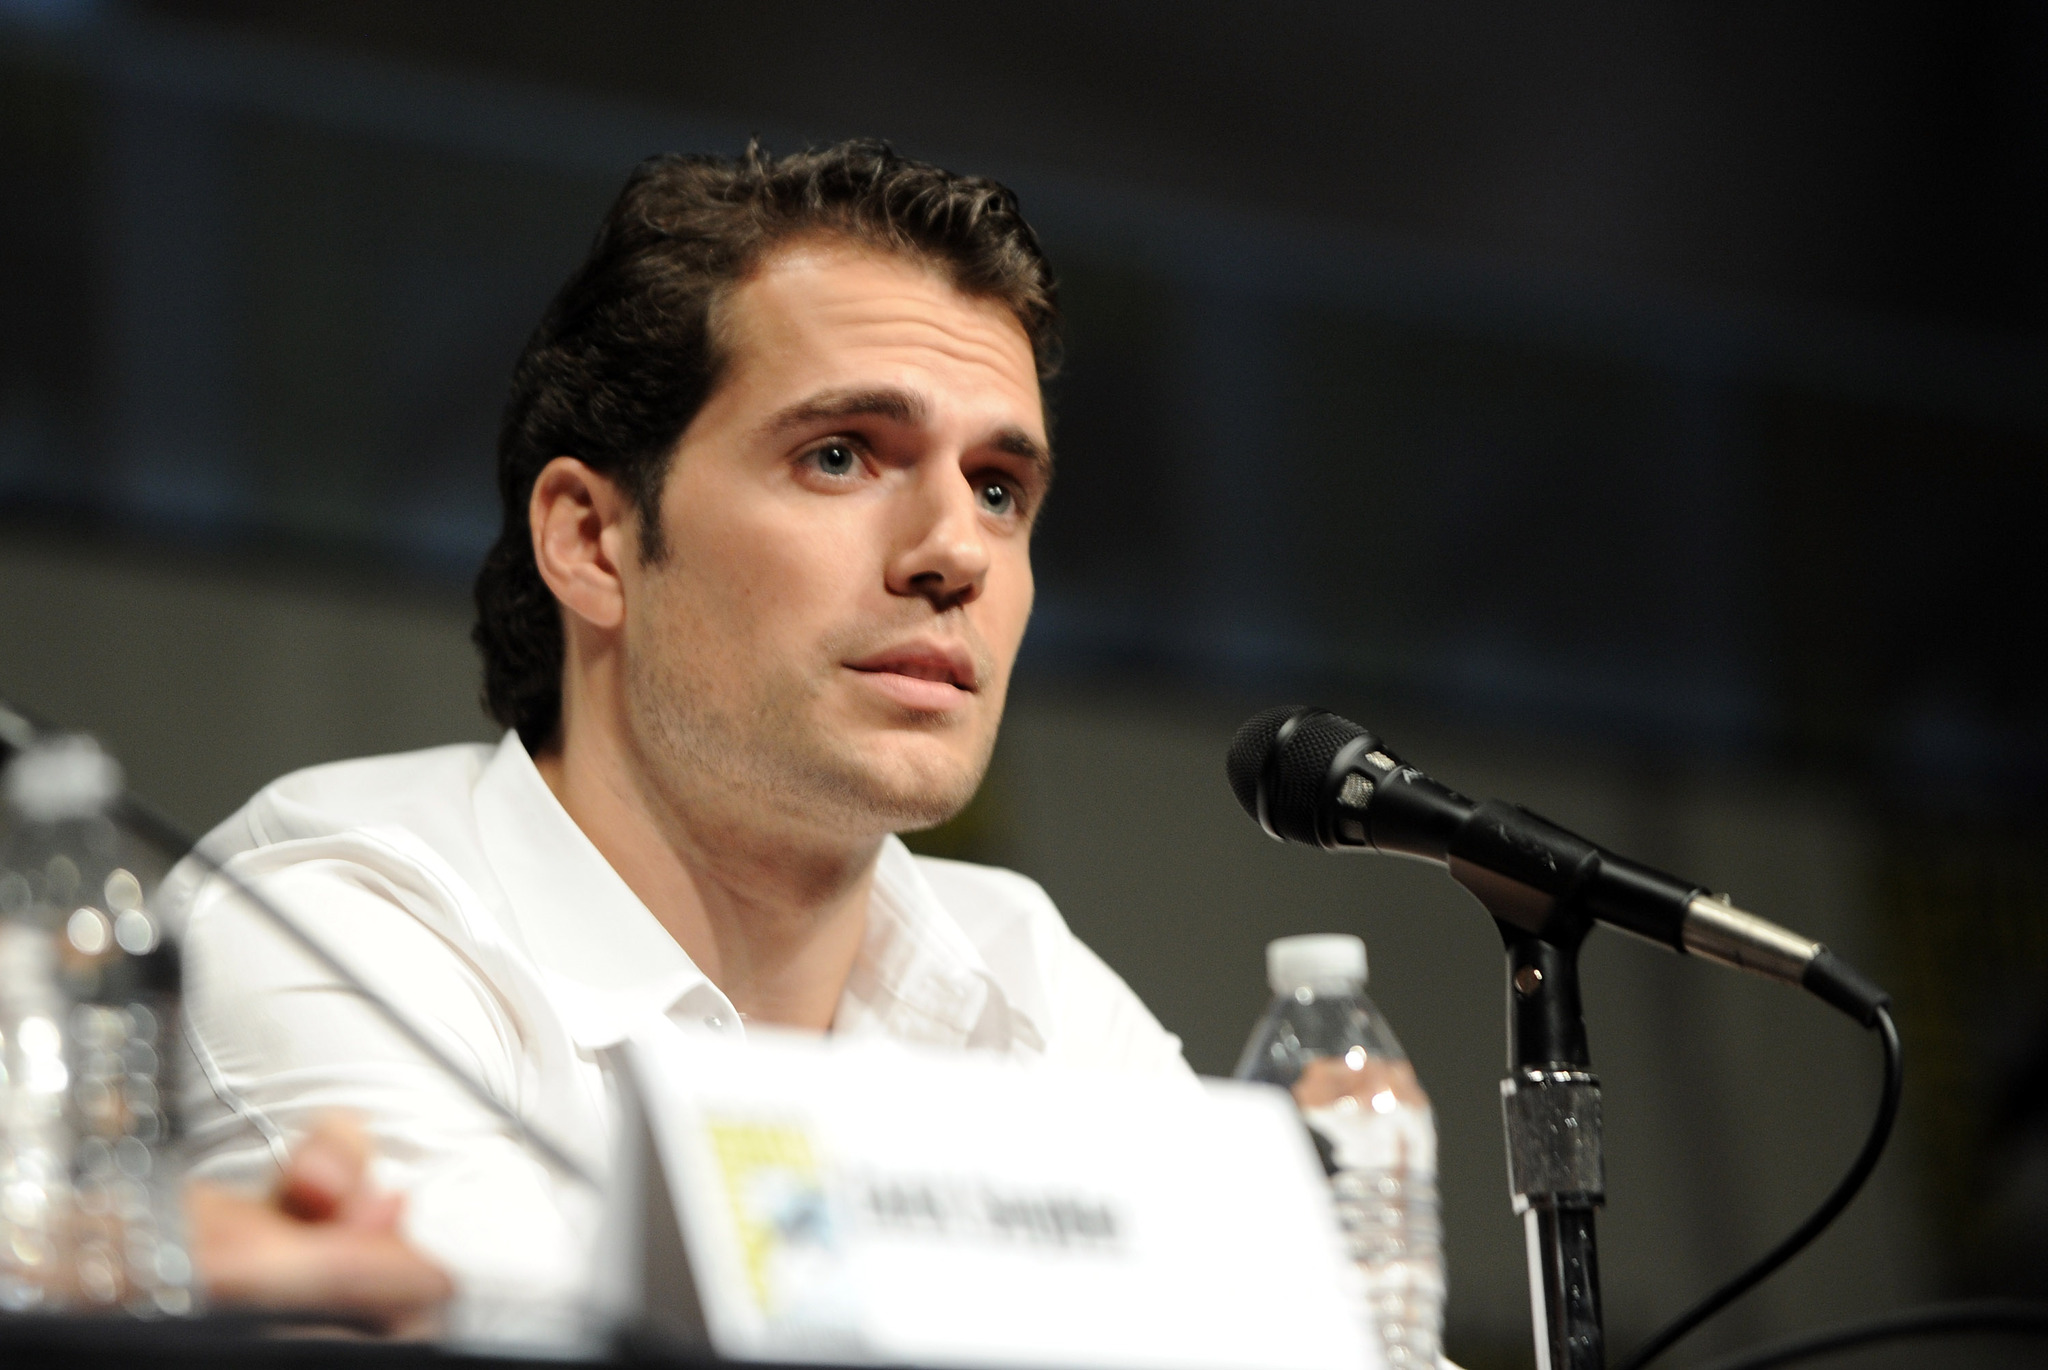 Henry Cavill at event of Zmogus is plieno (2013)